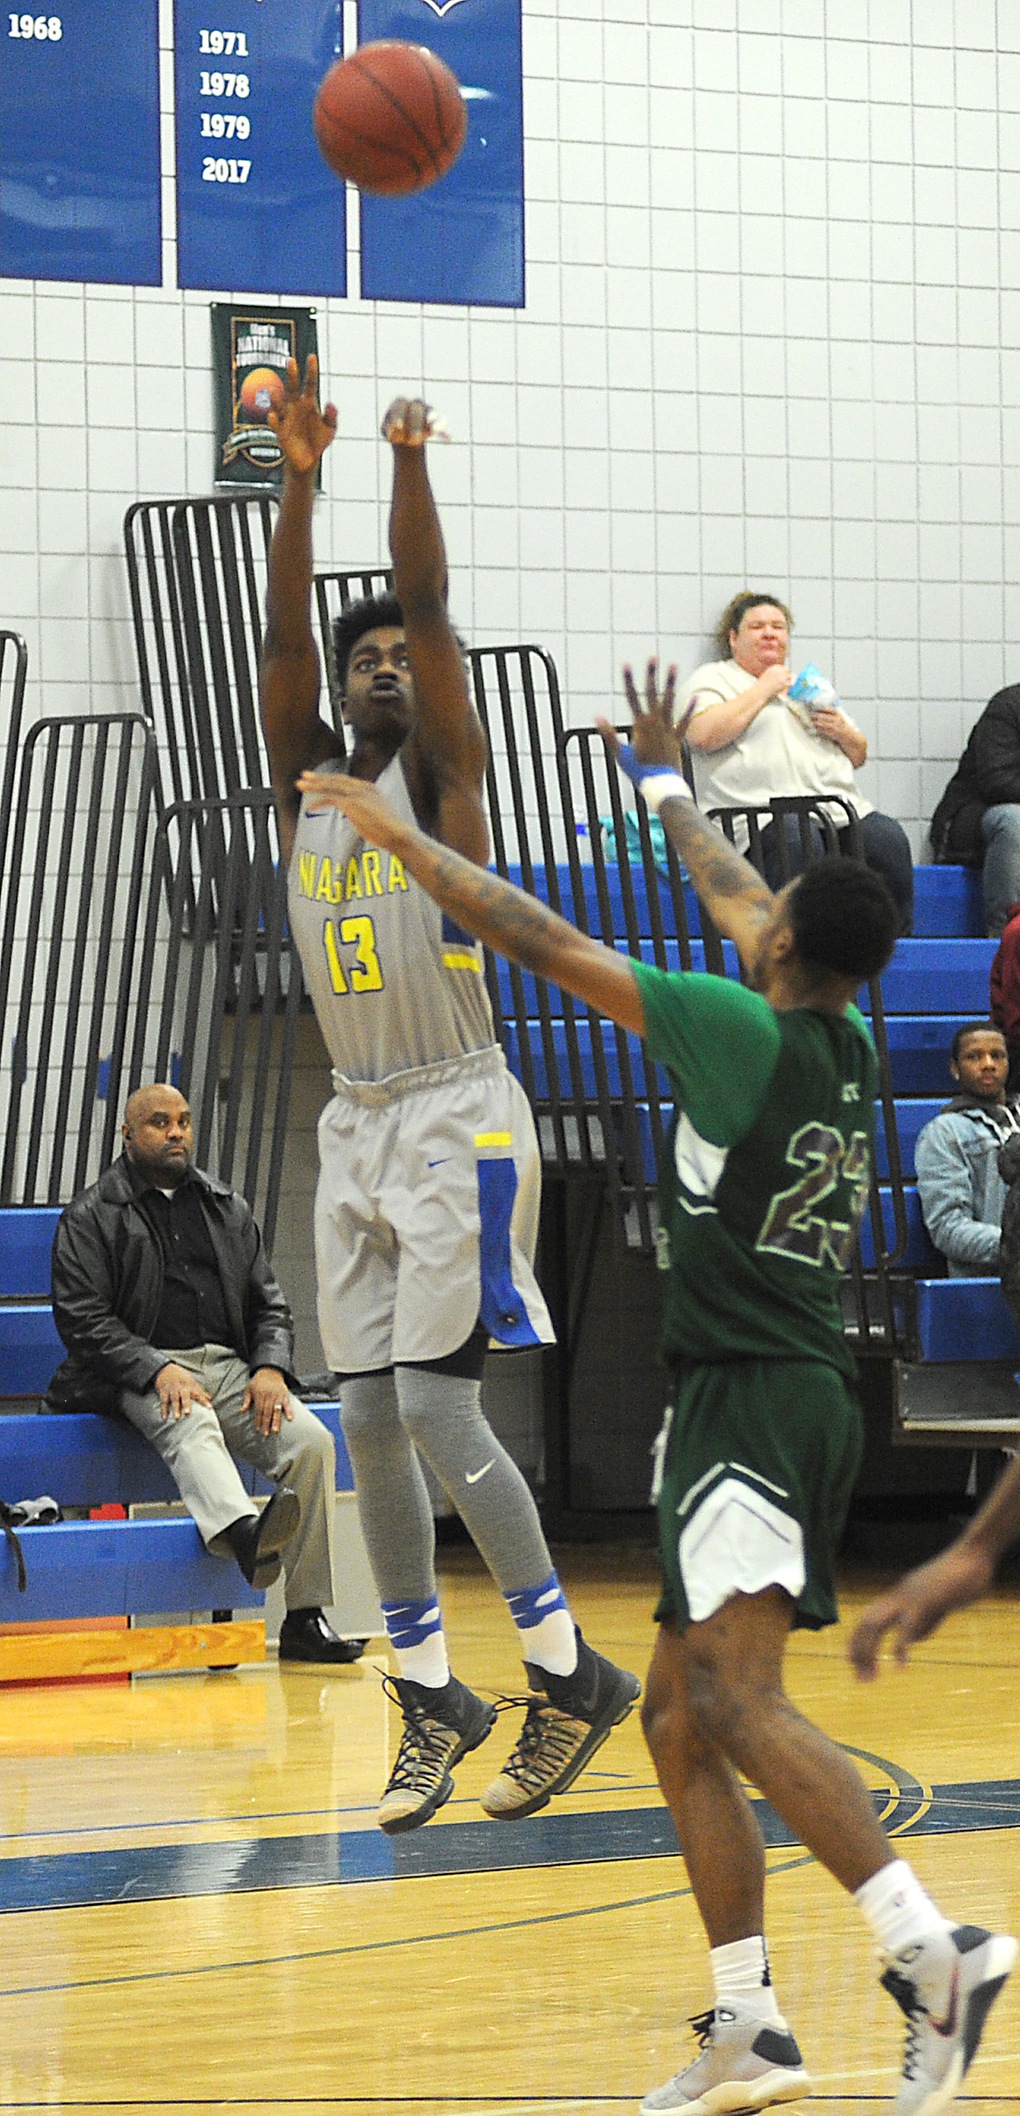 NCCC dropped by Kats